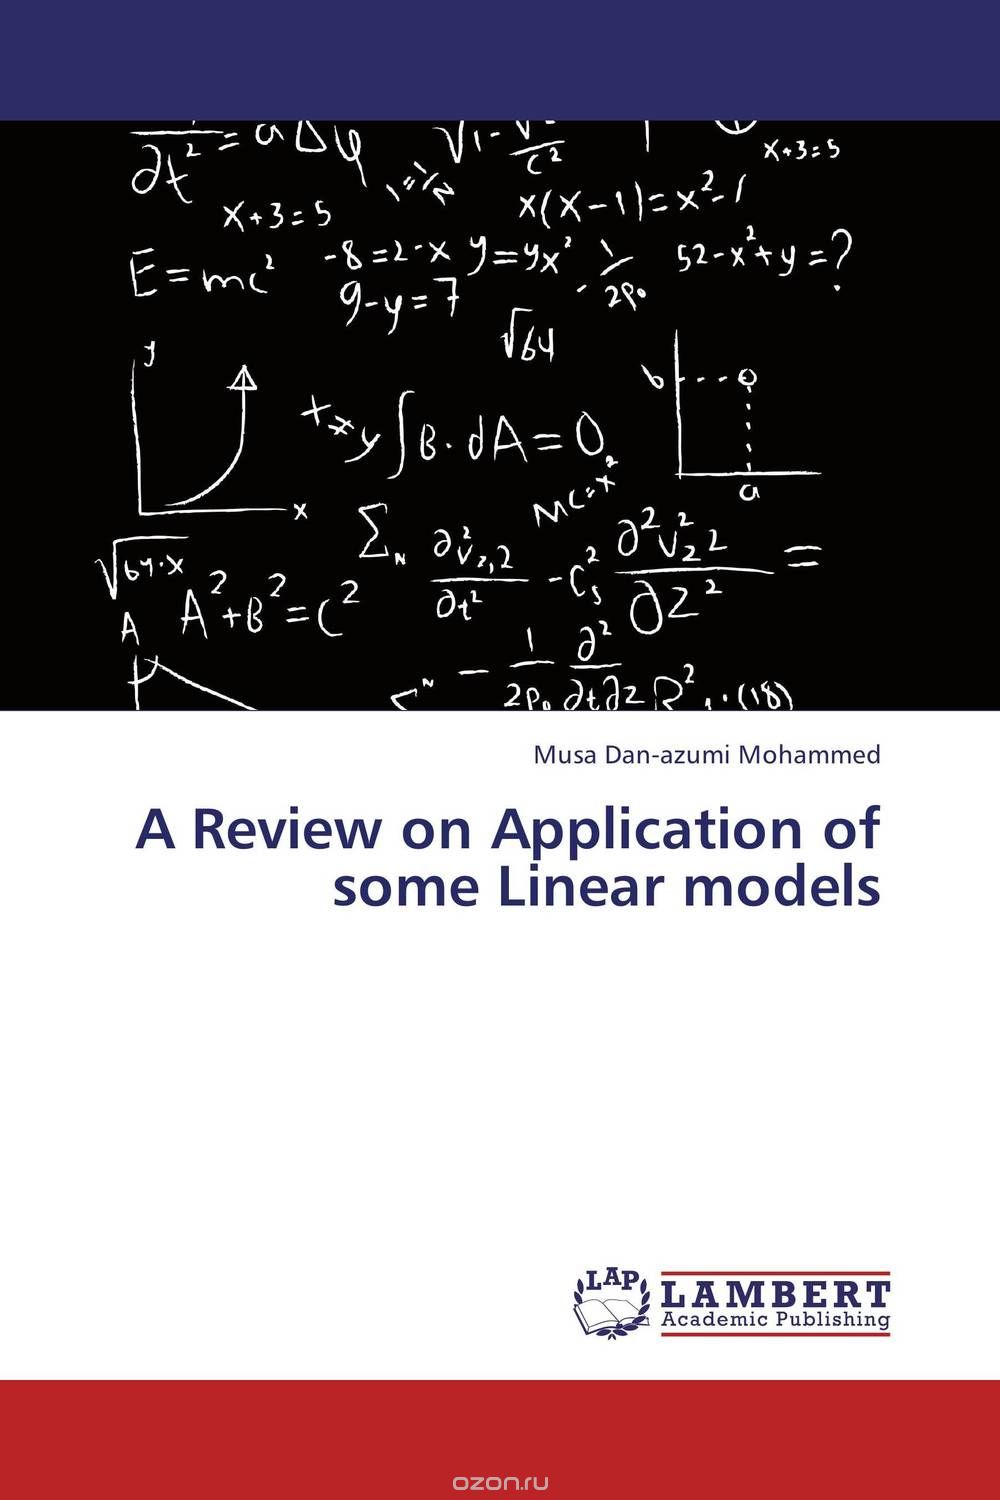 A Review on Application of some Linear models